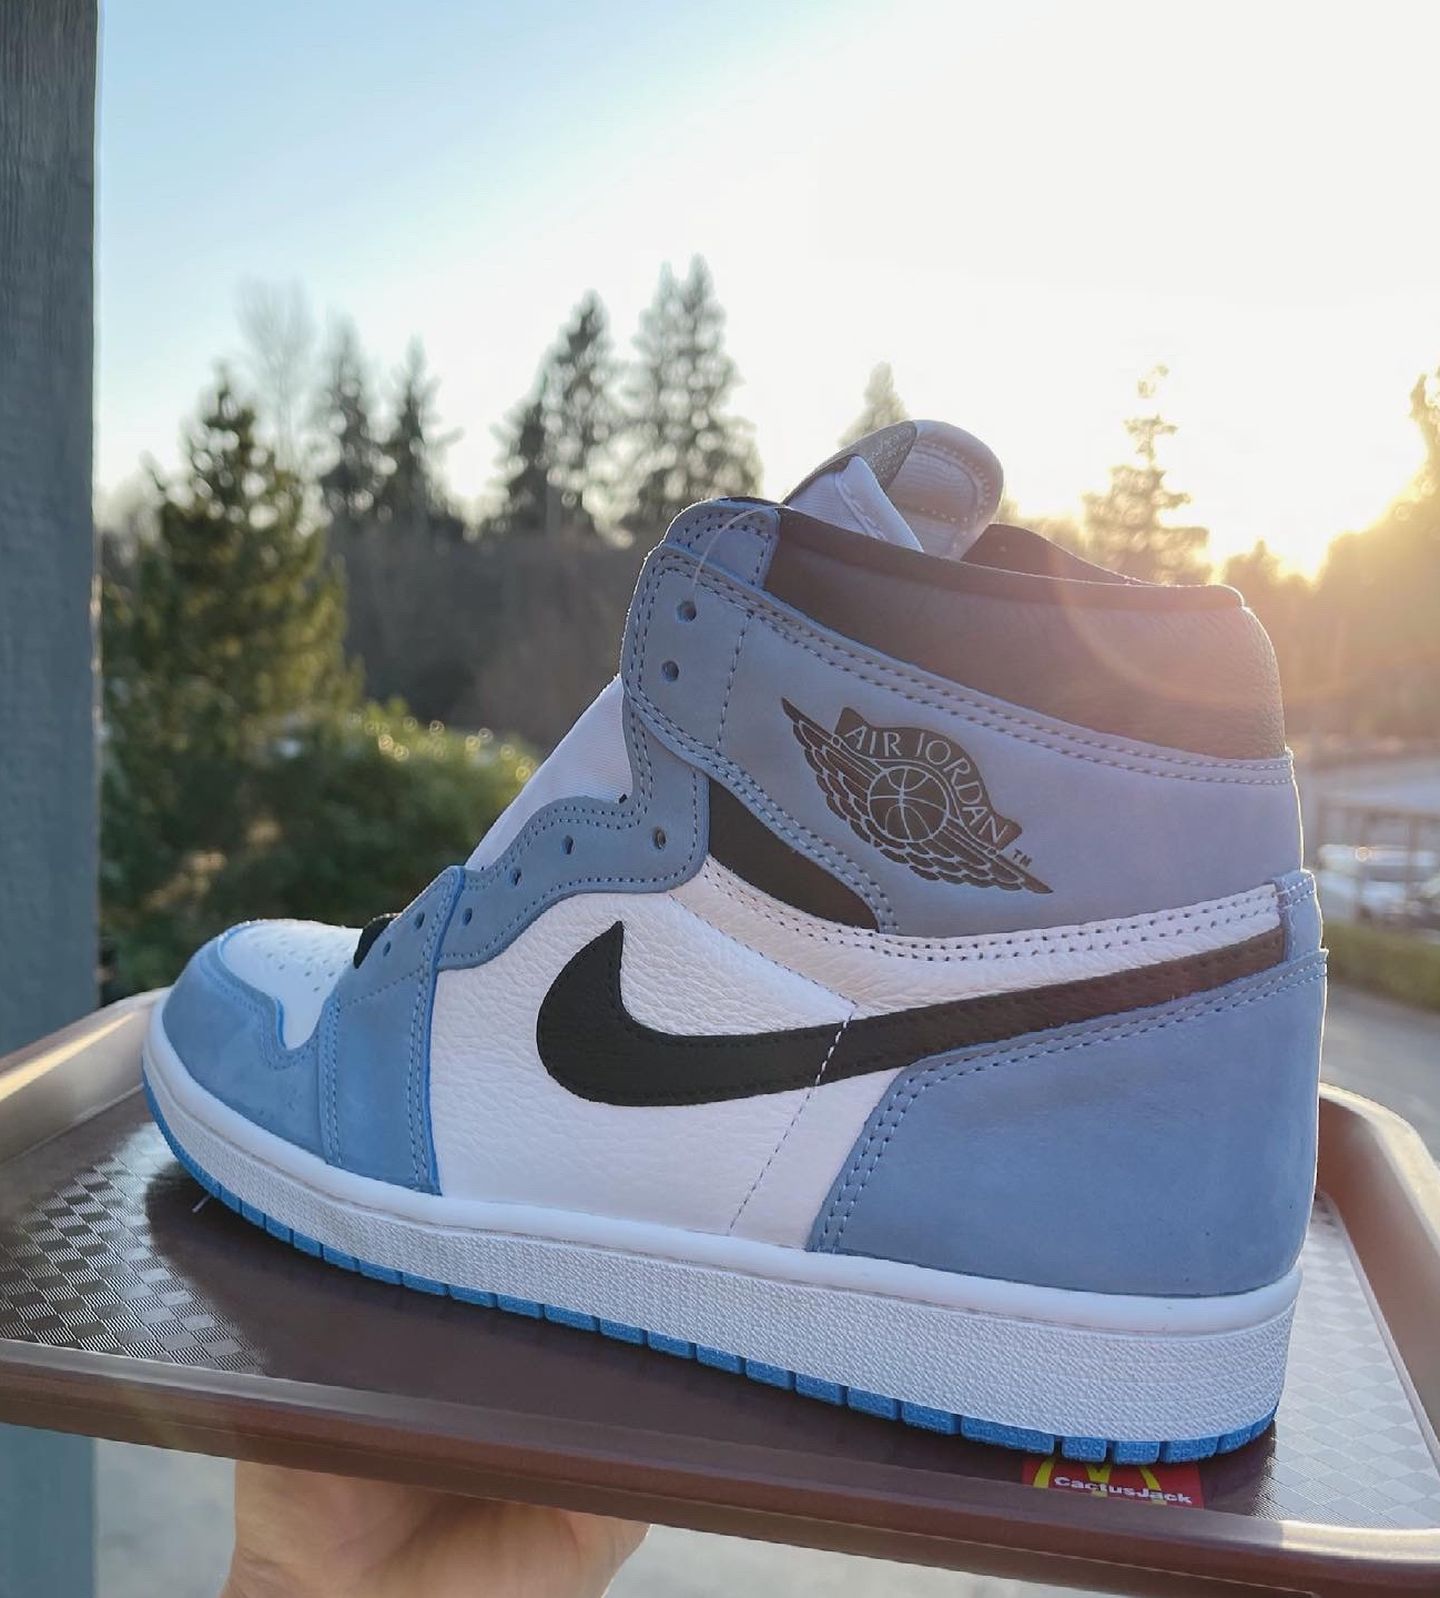 Raffle For Retro 1 And More!